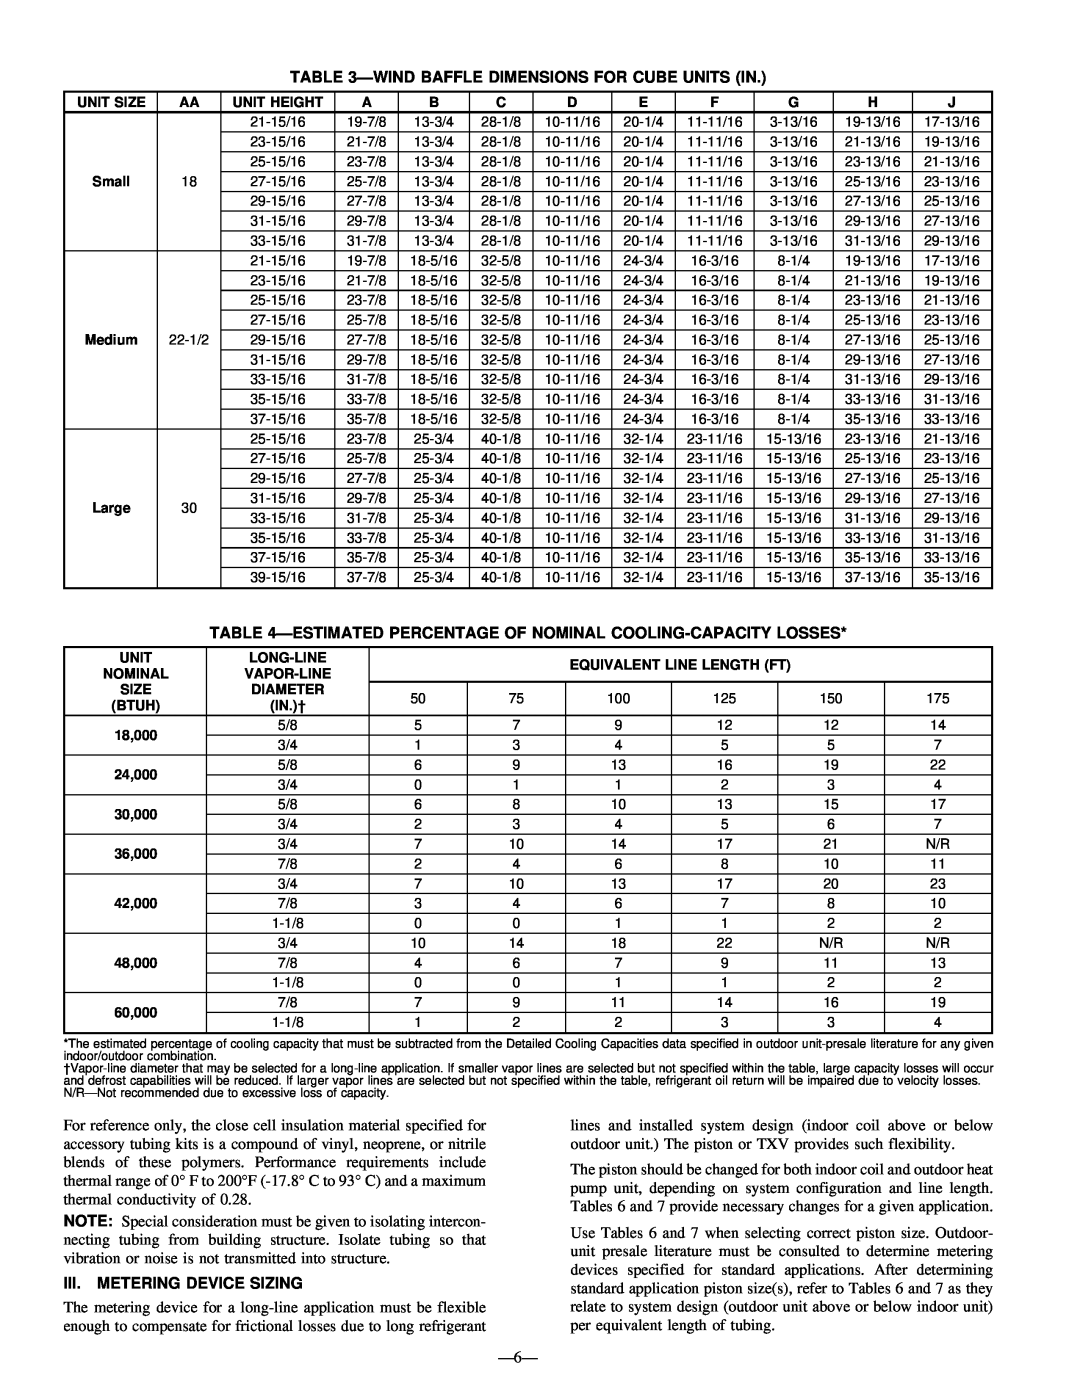 Bryant R-22 service manual Windbaffle Dimensions For Cube Units In, Iii. Metering Device Sizing 